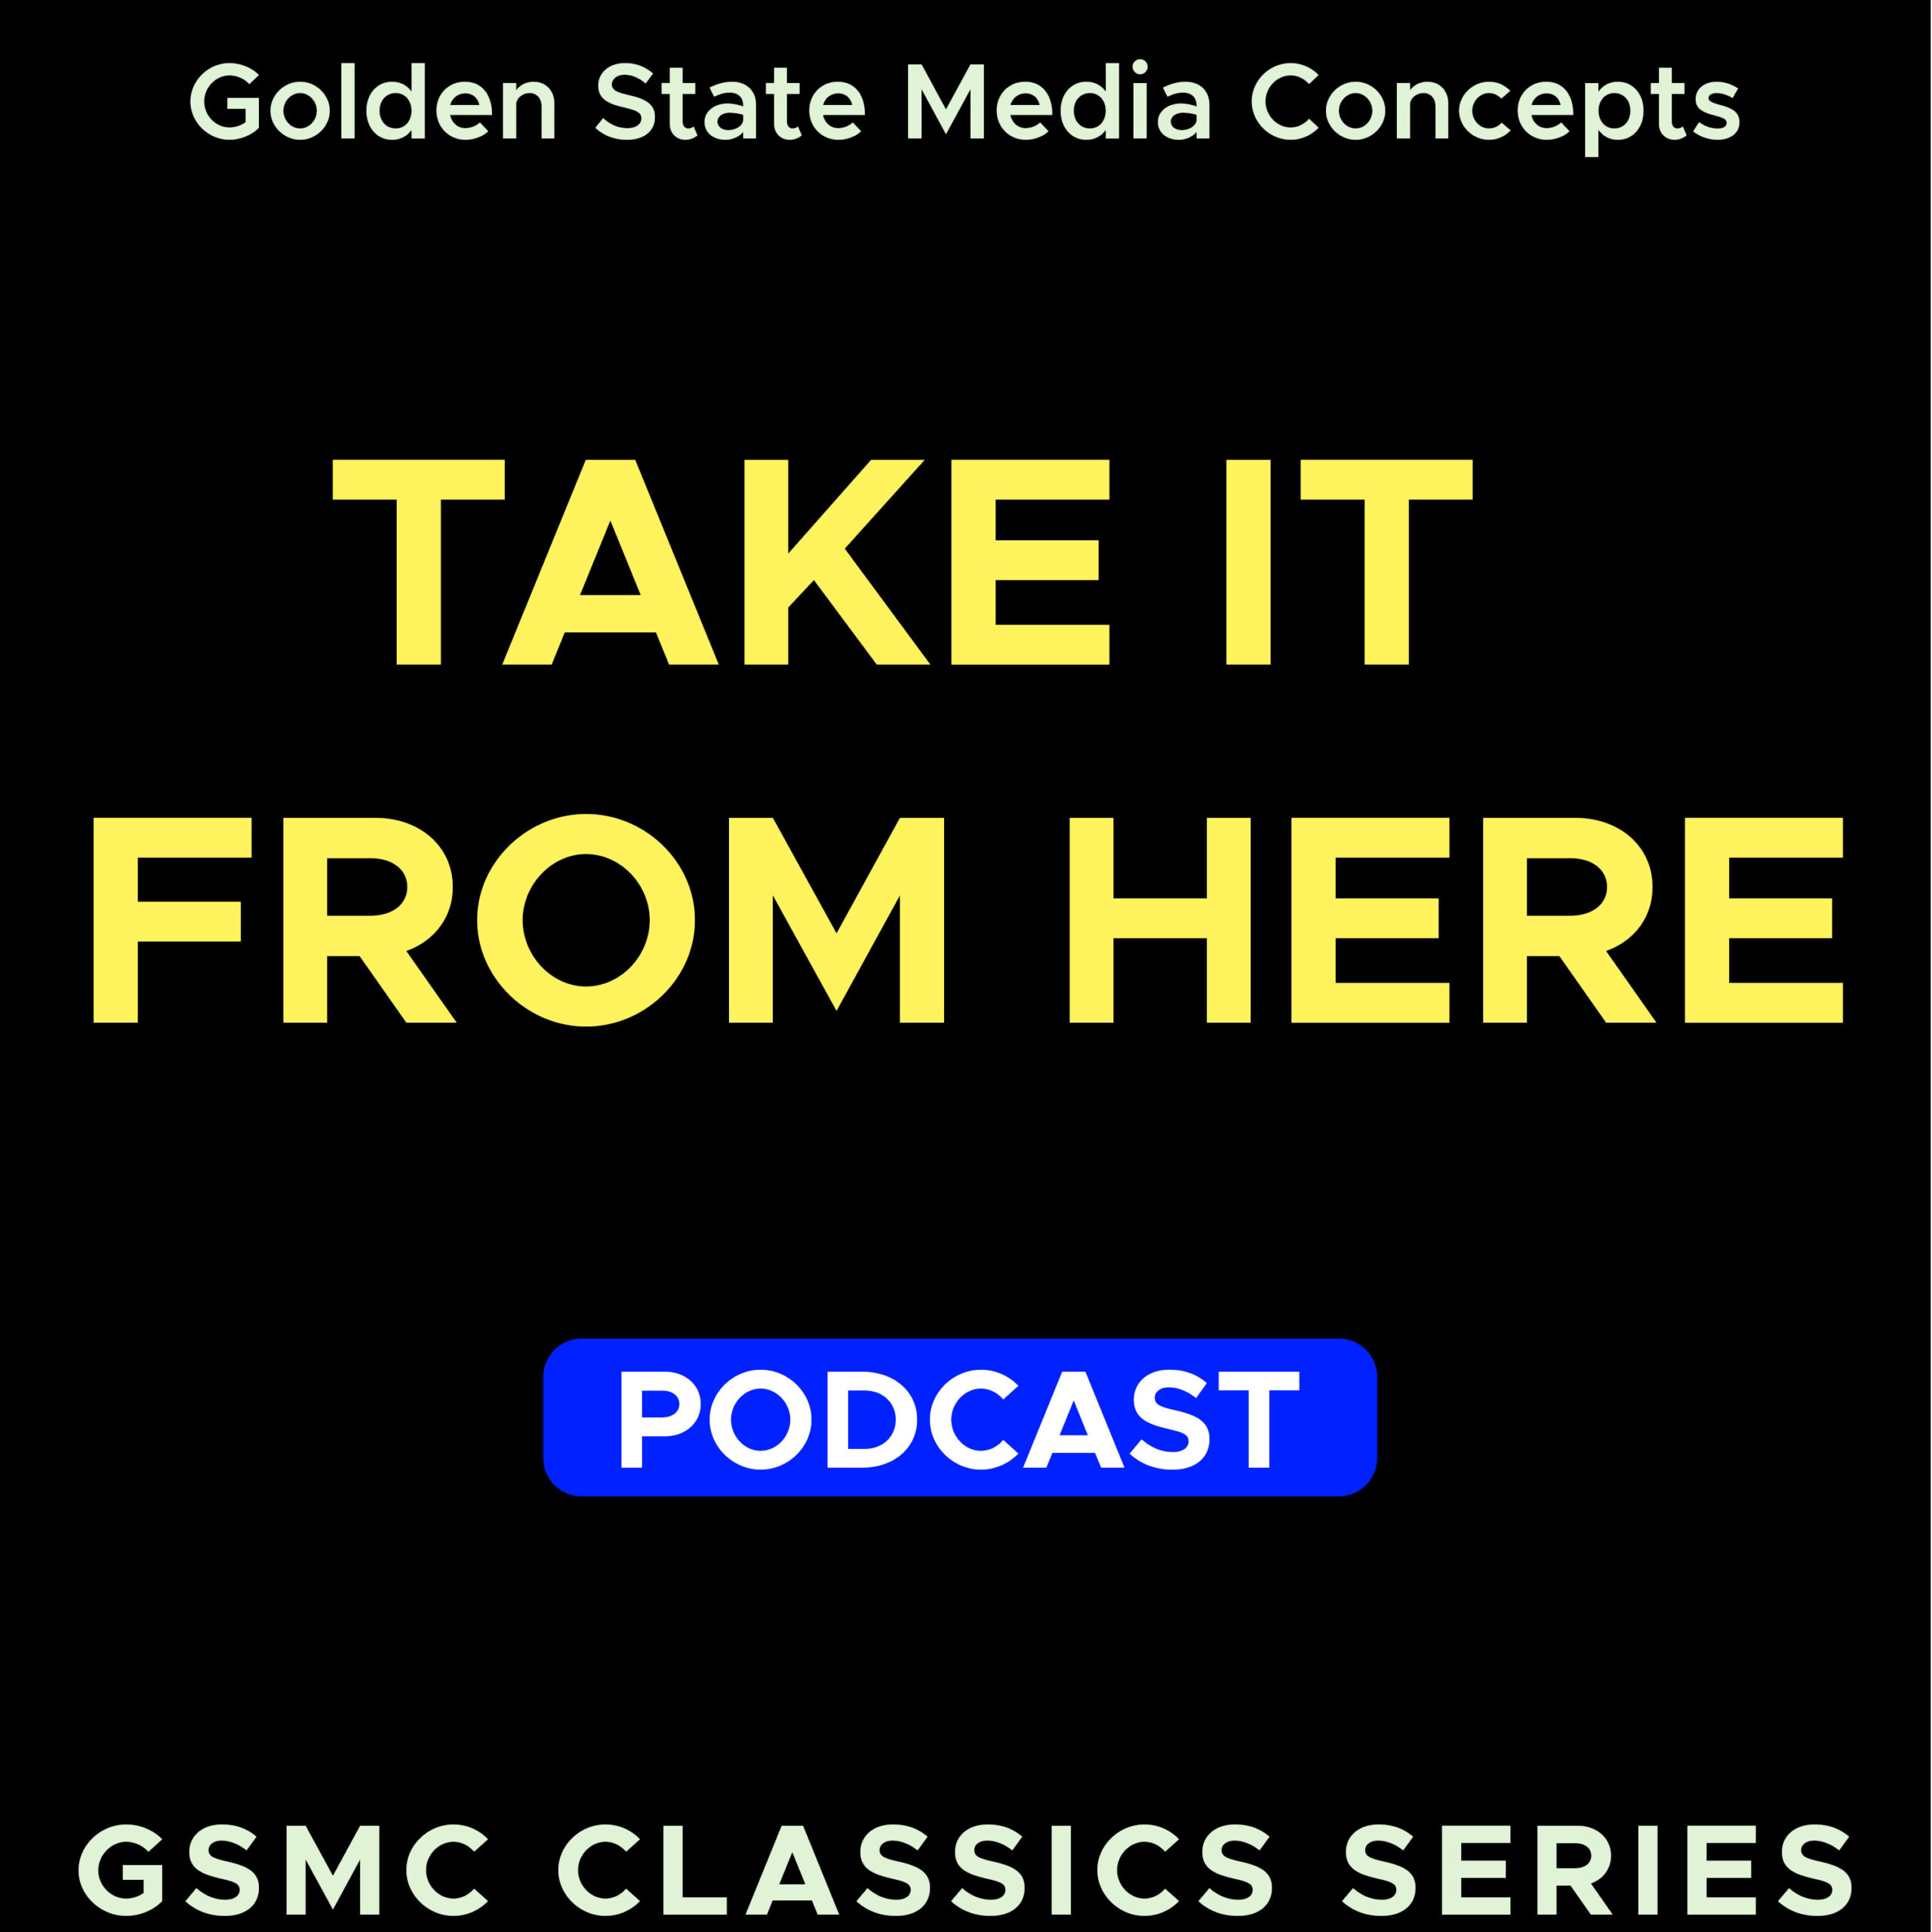 GSMC CLASSICS: TAKE IT FROM THERE